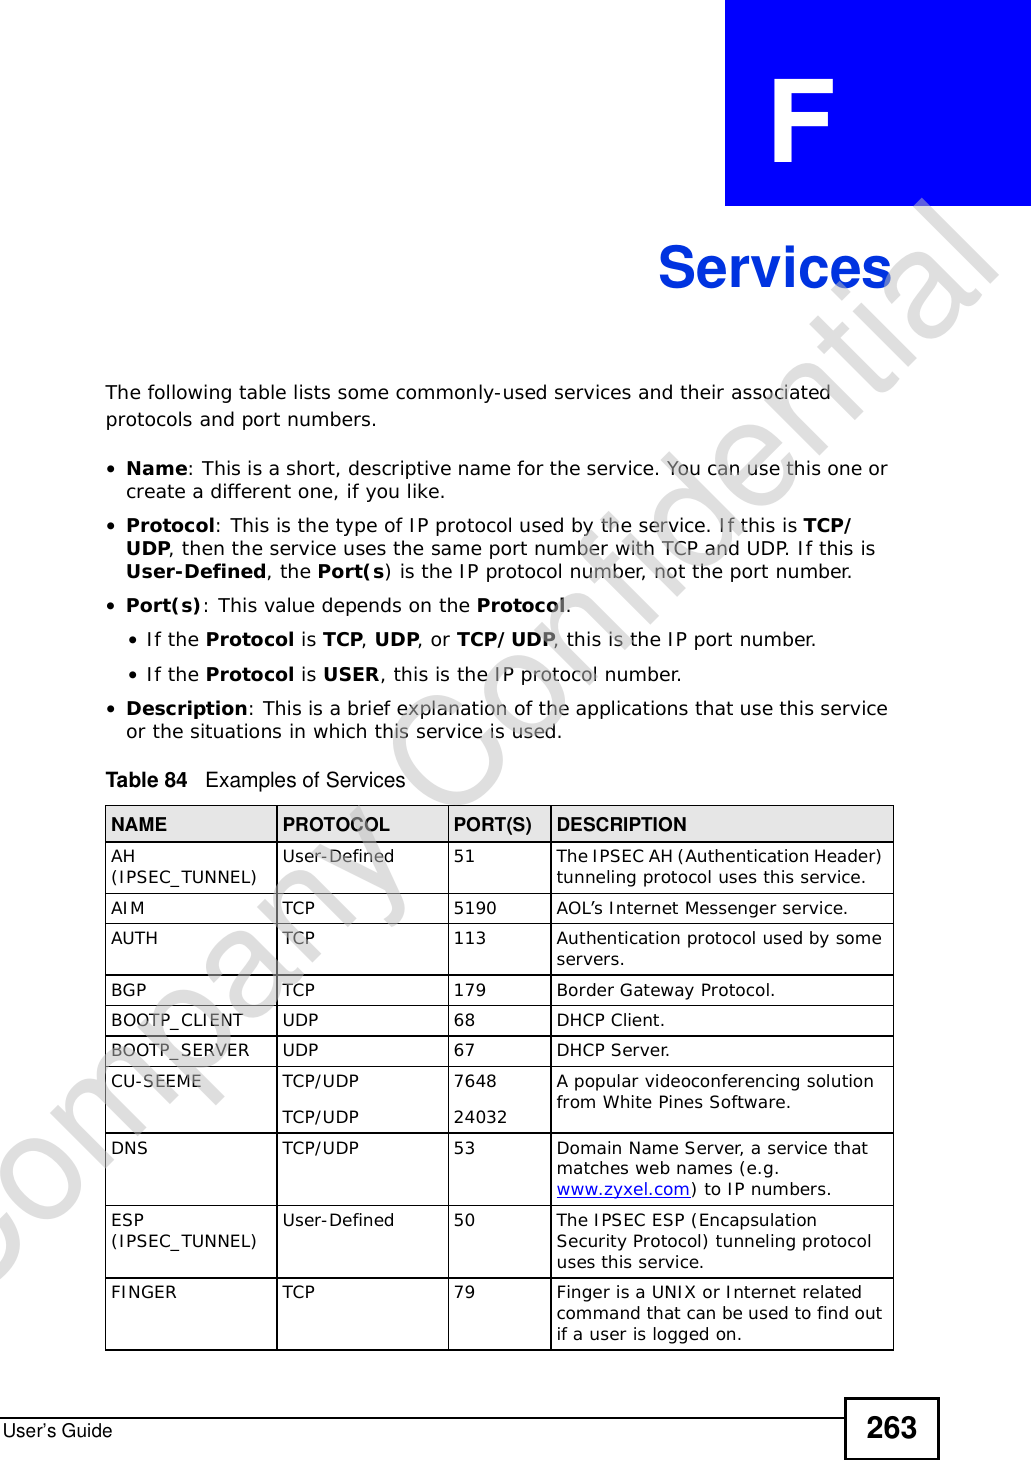 User’s Guide 263APPENDIX  F ServicesThe following table lists some commonly-used services and their associated protocols and port numbers.•Name: This is a short, descriptive name for the service. You can use this one or create a different one, if you like.•Protocol: This is the type of IP protocol used by the service. If this is TCP/UDP, then the service uses the same port number with TCP and UDP. If this is User-Defined, the Port(s) is the IP protocol number, not the port number.•Port(s): This value depends on the Protocol.•If the Protocol is TCP,UDP, or TCP/UDP, this is the IP port number.•If the Protocol is USER, this is the IP protocol number.•Description: This is a brief explanation of the applications that use this service or the situations in which this service is used.Table 84   Examples of ServicesNAME PROTOCOL PORT(S) DESCRIPTIONAH (IPSEC_TUNNEL) User-Defined 51 The IPSEC AH (Authentication Header) tunneling protocol uses this service.AIM TCP 5190 AOL’s Internet Messenger service.AUTH TCP 113 Authentication protocol used by some servers.BGP TCP 179 Border Gateway Protocol.BOOTP_CLIENT UDP 68 DHCP Client.BOOTP_SERVER UDP 67 DHCP Server.CU-SEEME TCP/UDPTCP/UDP 764824032A popular videoconferencing solution from White Pines Software.DNS TCP/UDP 53 Domain Name Server, a service that matches web names (e.g. www.zyxel.com) to IP numbers.ESP(IPSEC_TUNNEL) User-Defined 50 The IPSEC ESP (Encapsulation Security Protocol) tunneling protocol uses this service.FINGER TCP 79 Finger is a UNIX or Internet related command that can be used to find out if a user is logged on.Company Confidential